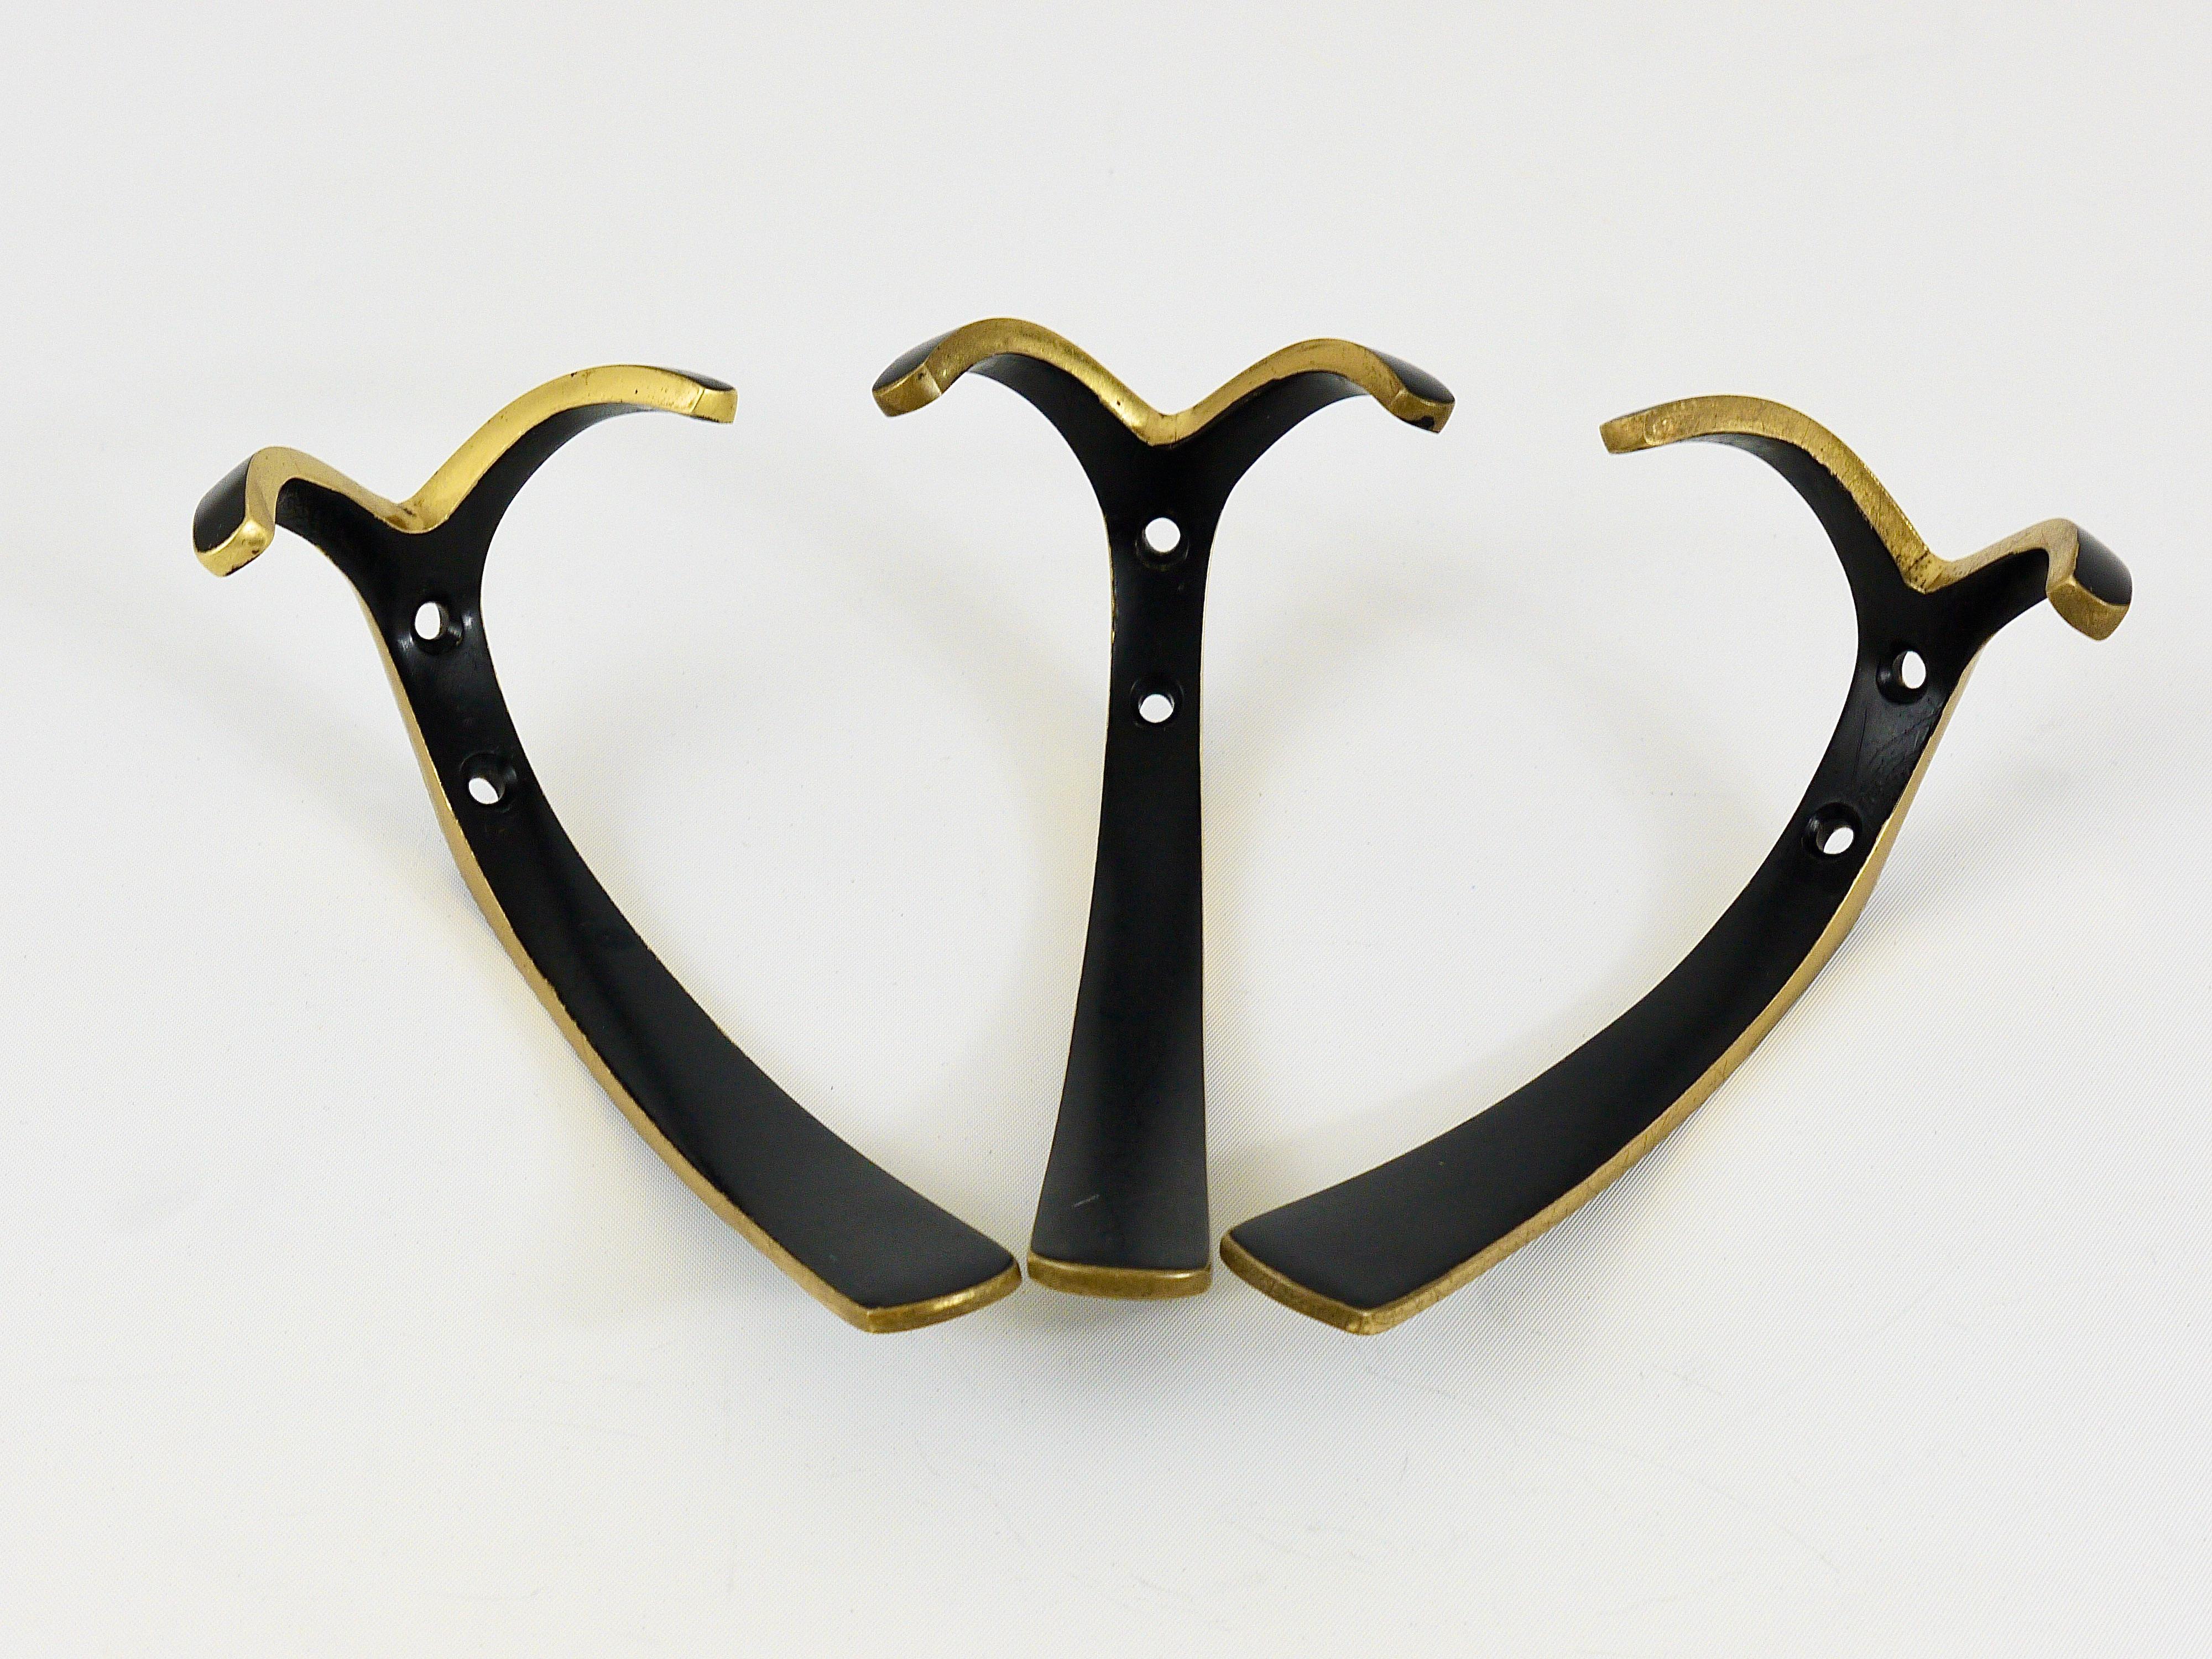 Two Midcentury Brass Double Wall Hooks by Herta Baller, Austria, 1950s For Sale 5